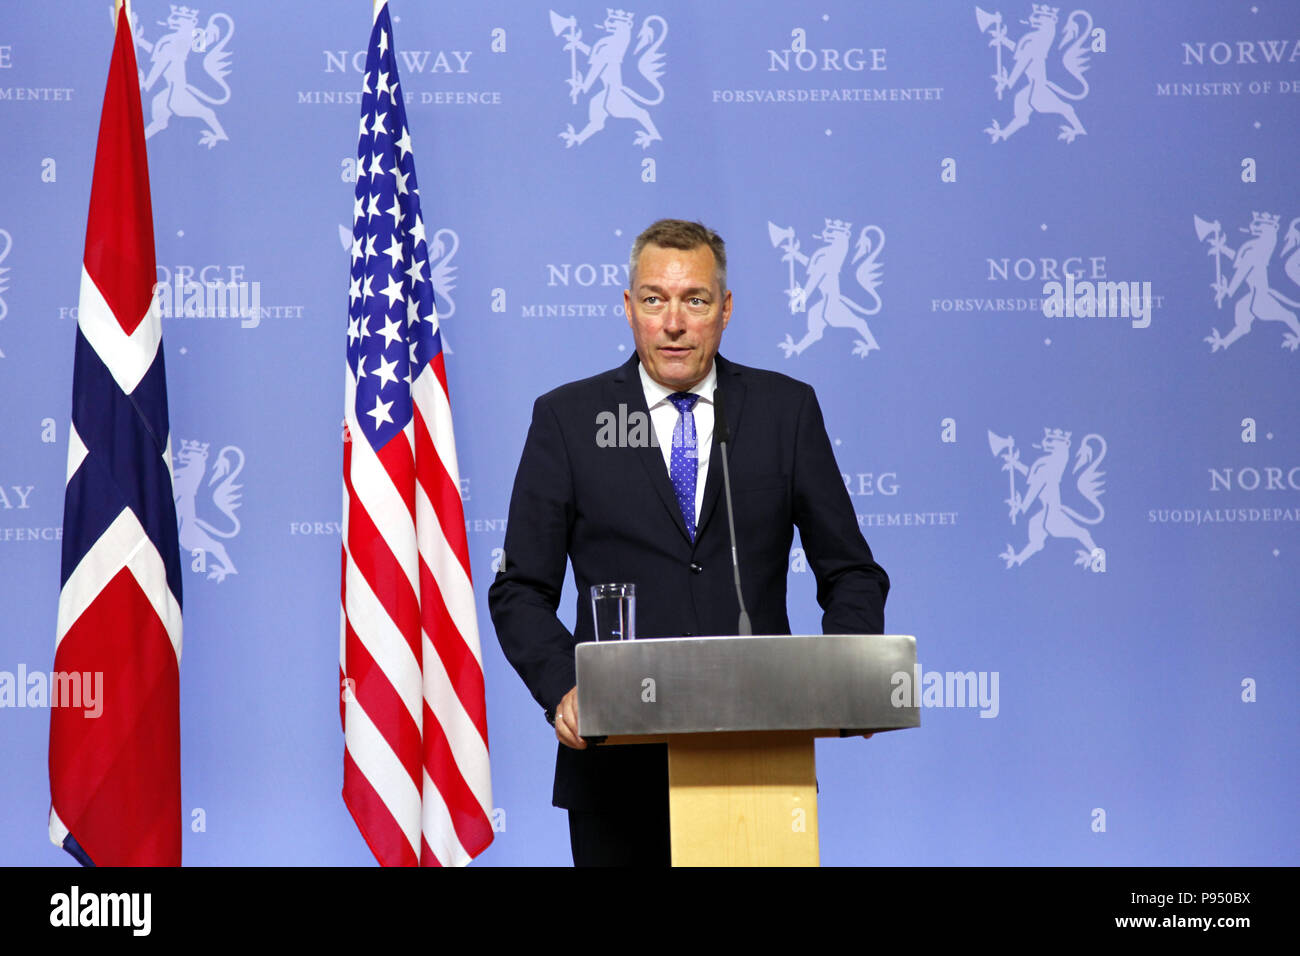 Oslo, Norway. 14th July, 2018. Norwegian Minister of Defence Frank Bakke-Jensen attends a joint press conference with U.S. Secretary of Defense James Mattis (not seen in picture) in Oslo, Norway, July 14, 2018. Norway on Saturday reconfirmed its commitment to gradually increase defense spending to two percent of GDP in the North Atlantic Treaty Organization (NATO) during a visit by U.S. Secretary of Defense James Mattis to the Nordic country. Credit: Liang Youchang/Xinhua/Alamy Live News Stock Photo